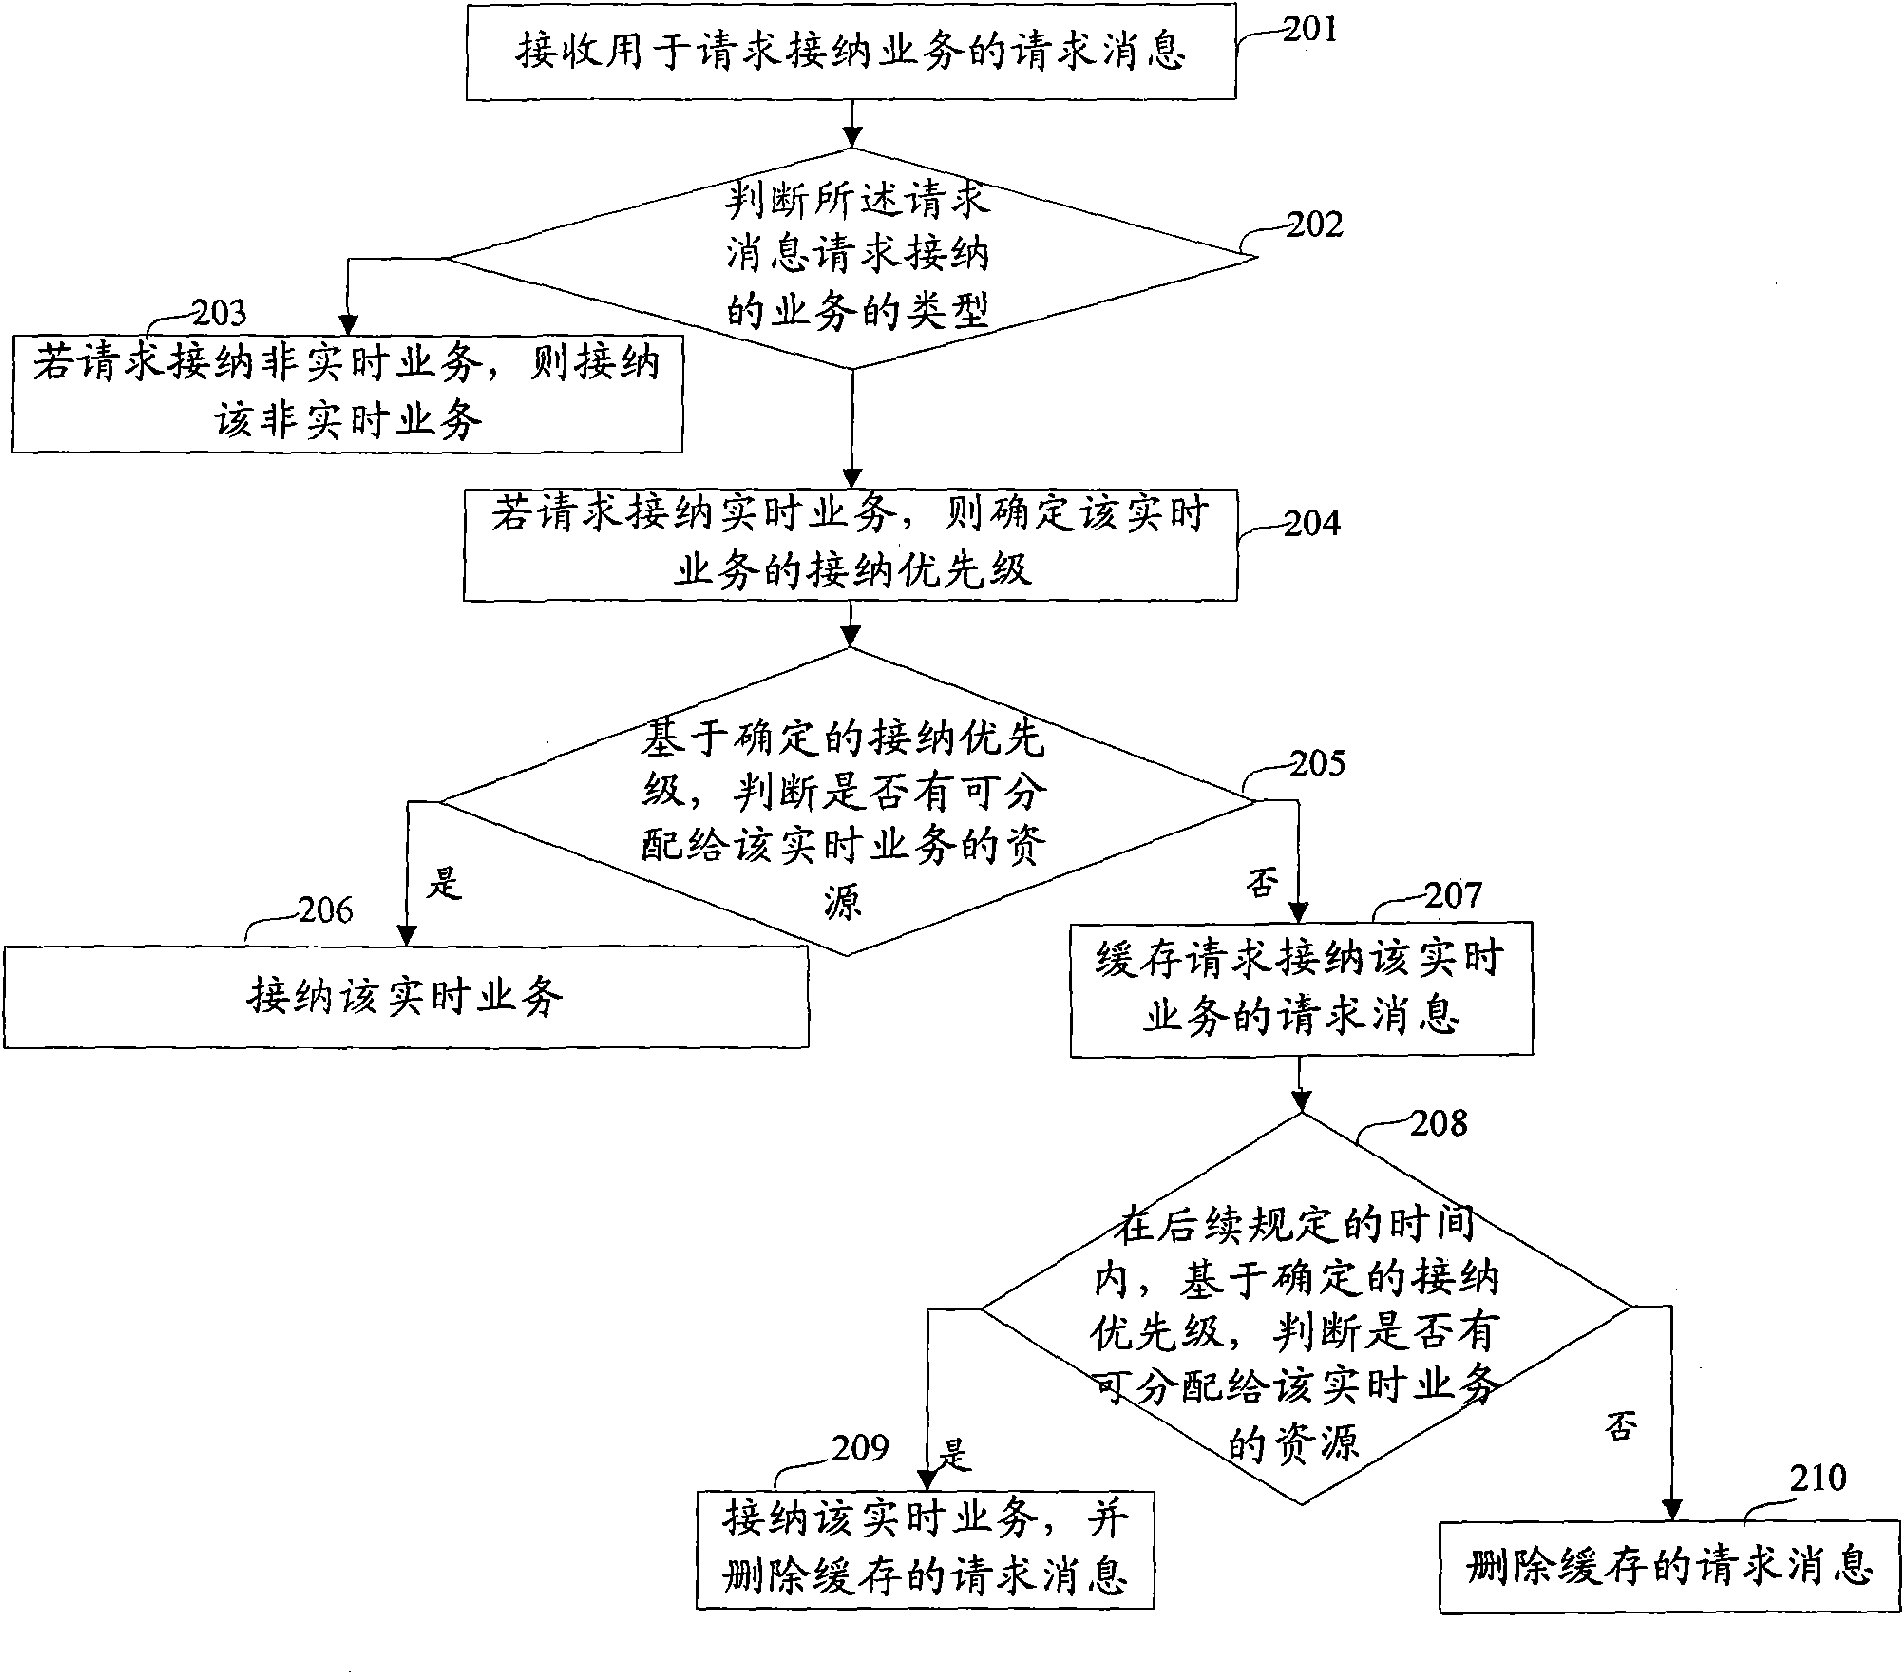 Admission control method for determining priority of resource allocation and related device